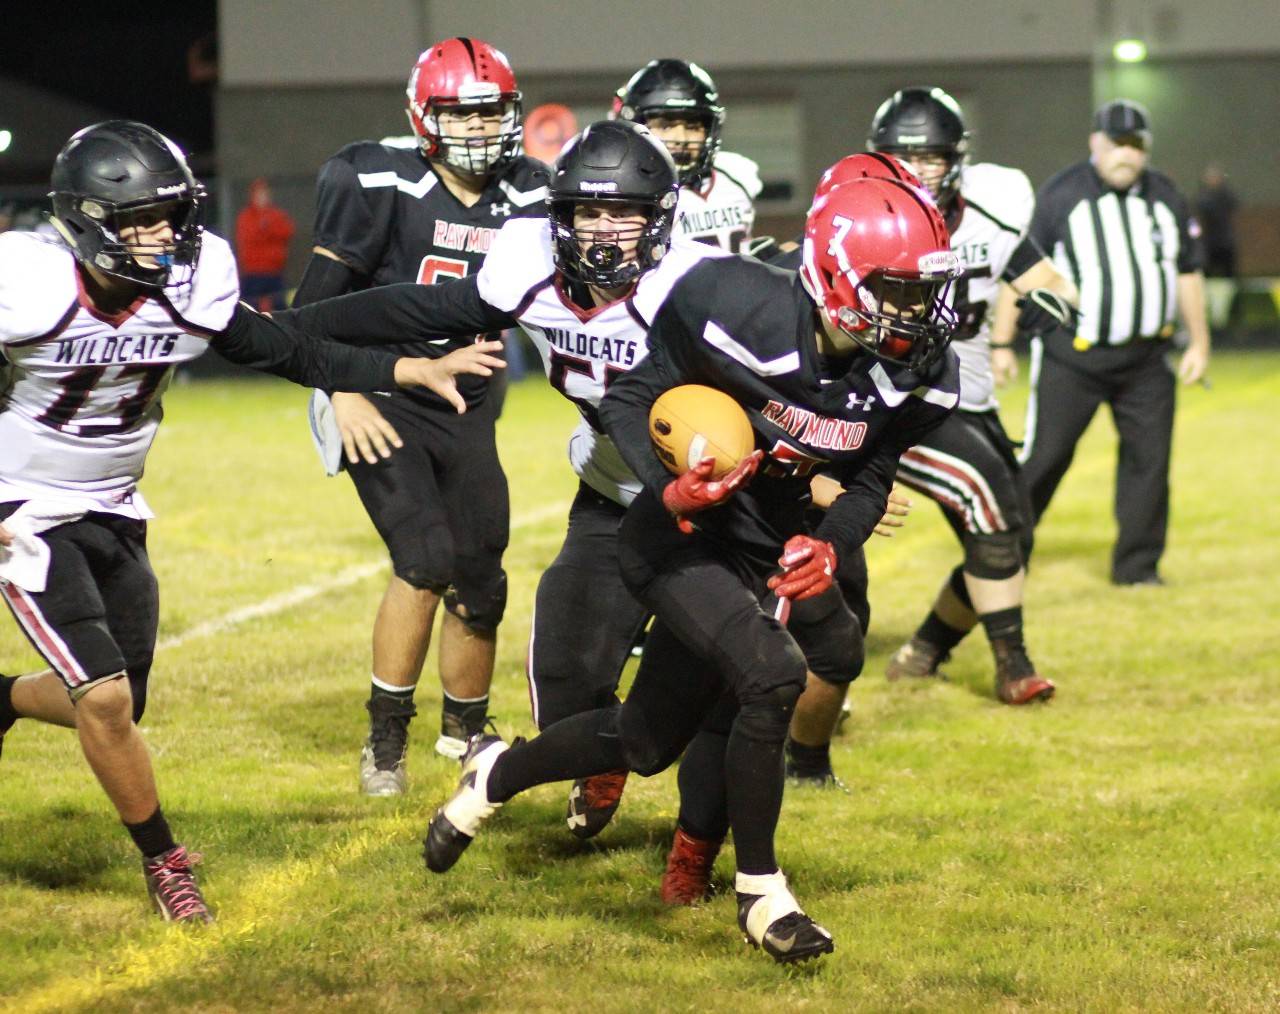 Raymond running back McCartney Maden runs against the Ocosta Wildcats on Friday. Maden had 155 rushing yards and four touchdowns in the Raymond victory. (Photo by Larry Bale)